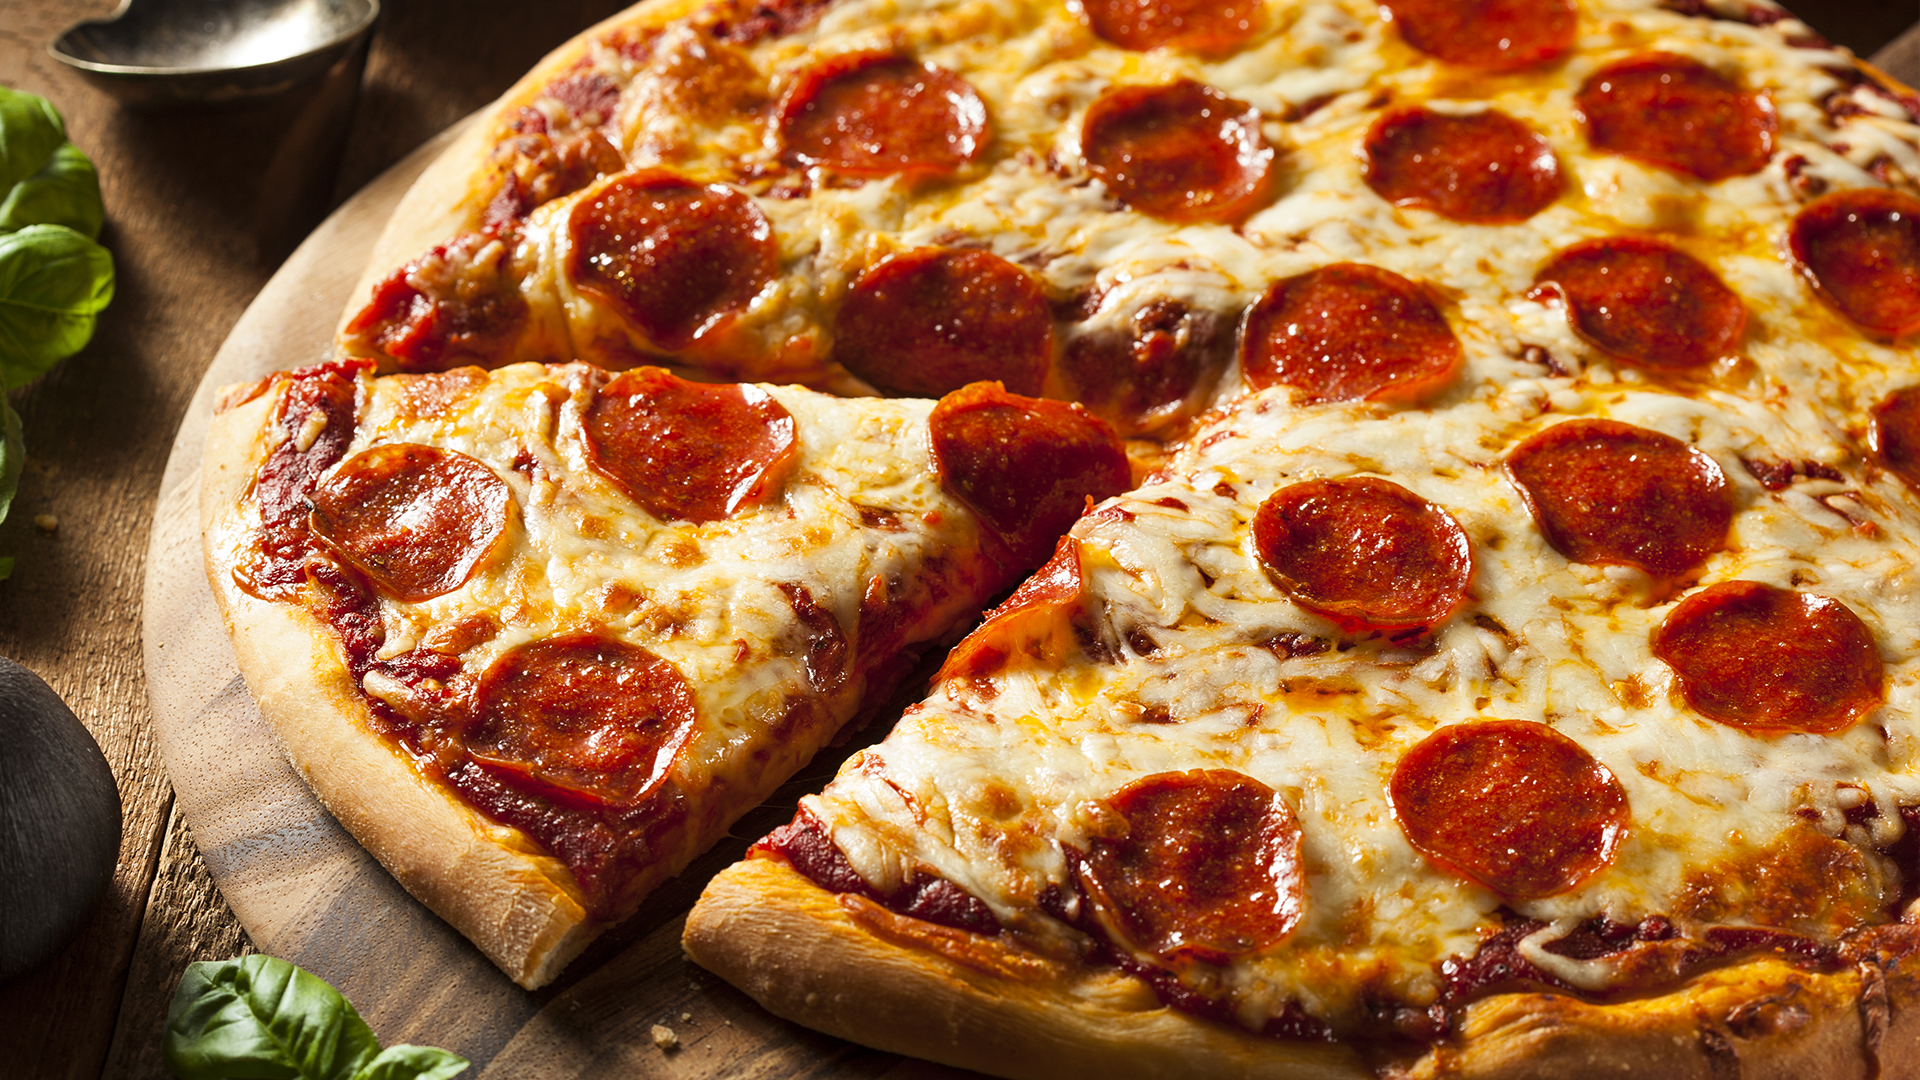 Who invented pizza?